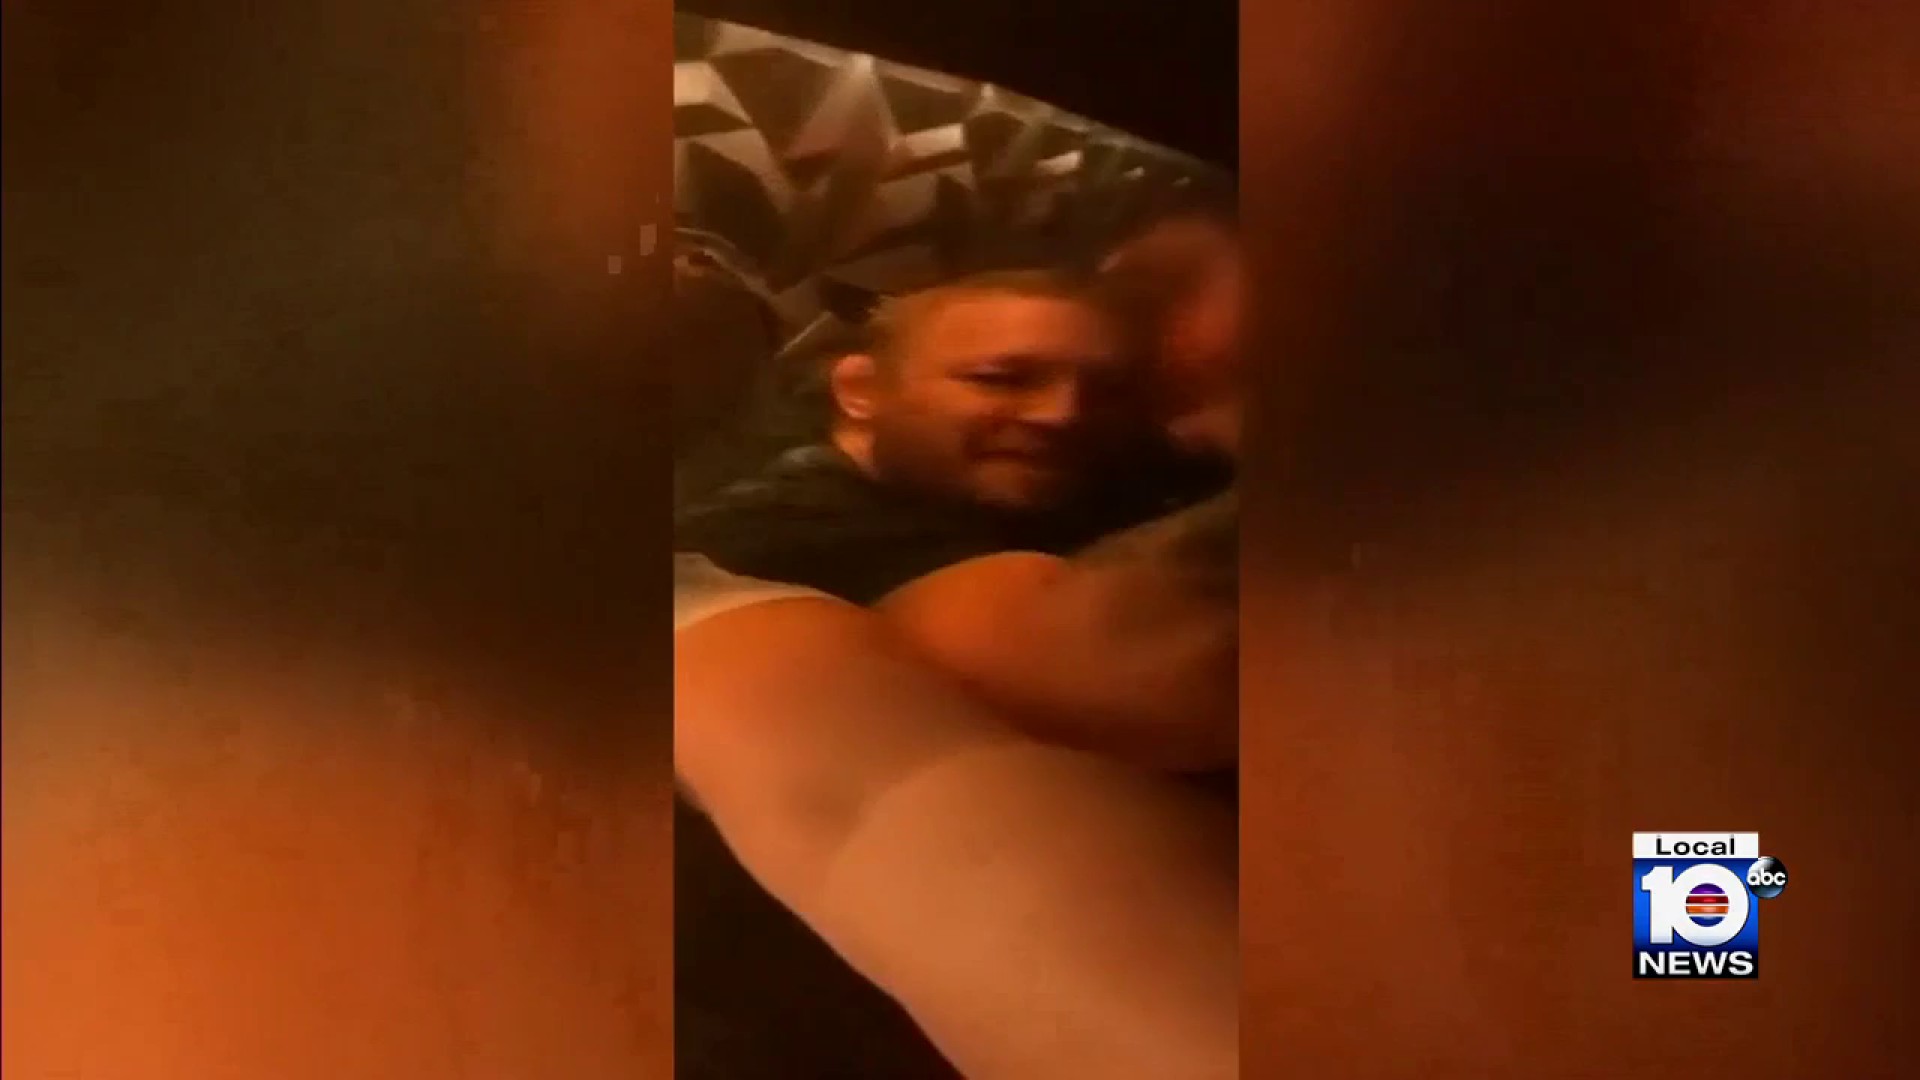 Viral Rape Xxx - More video surfaces of Conor McGregor with woman who alleges rape